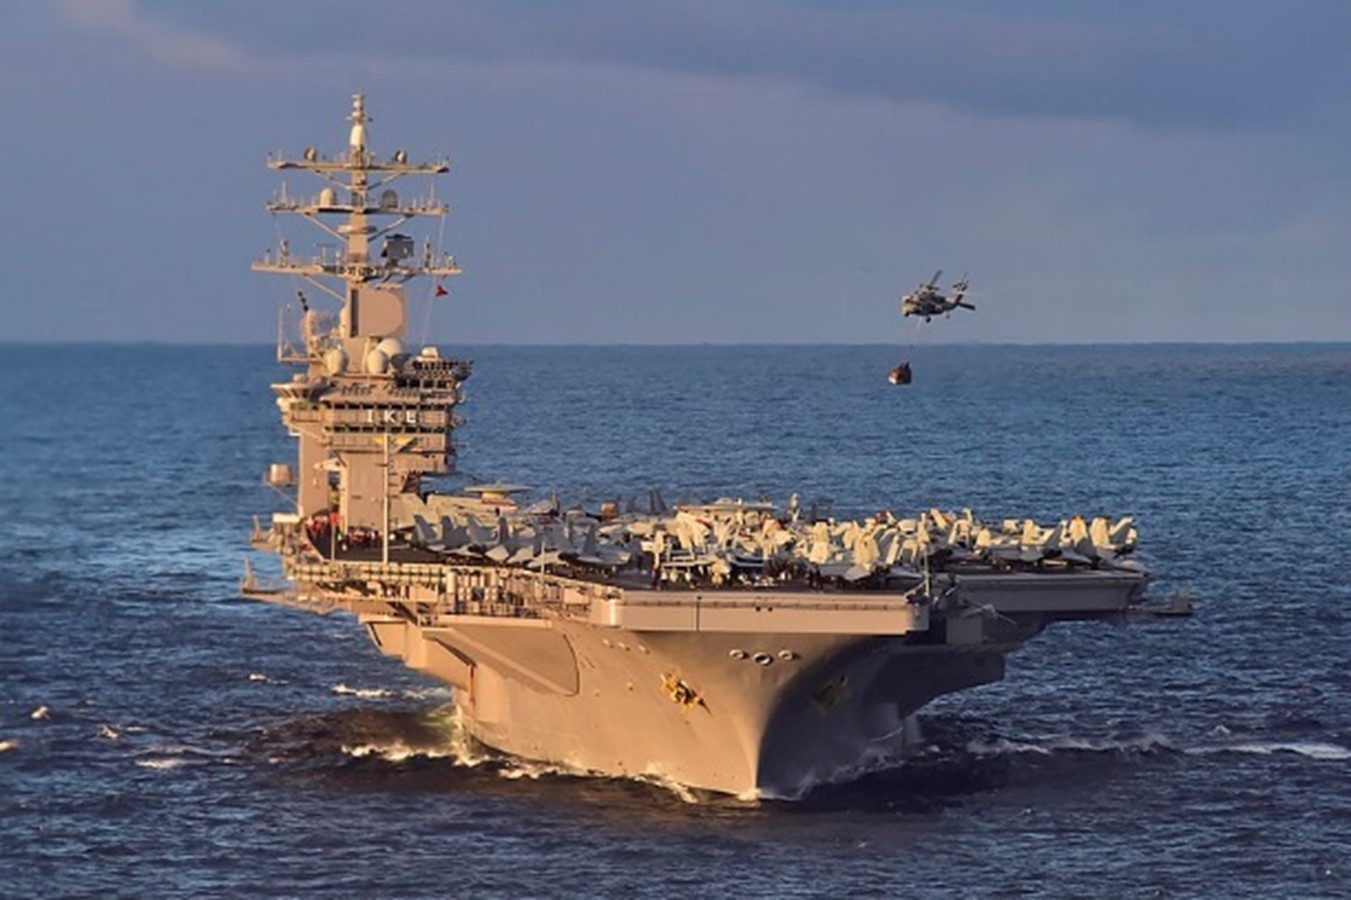 A military aircraft carrier sailing on the ocean with a helicopter flying nearby.